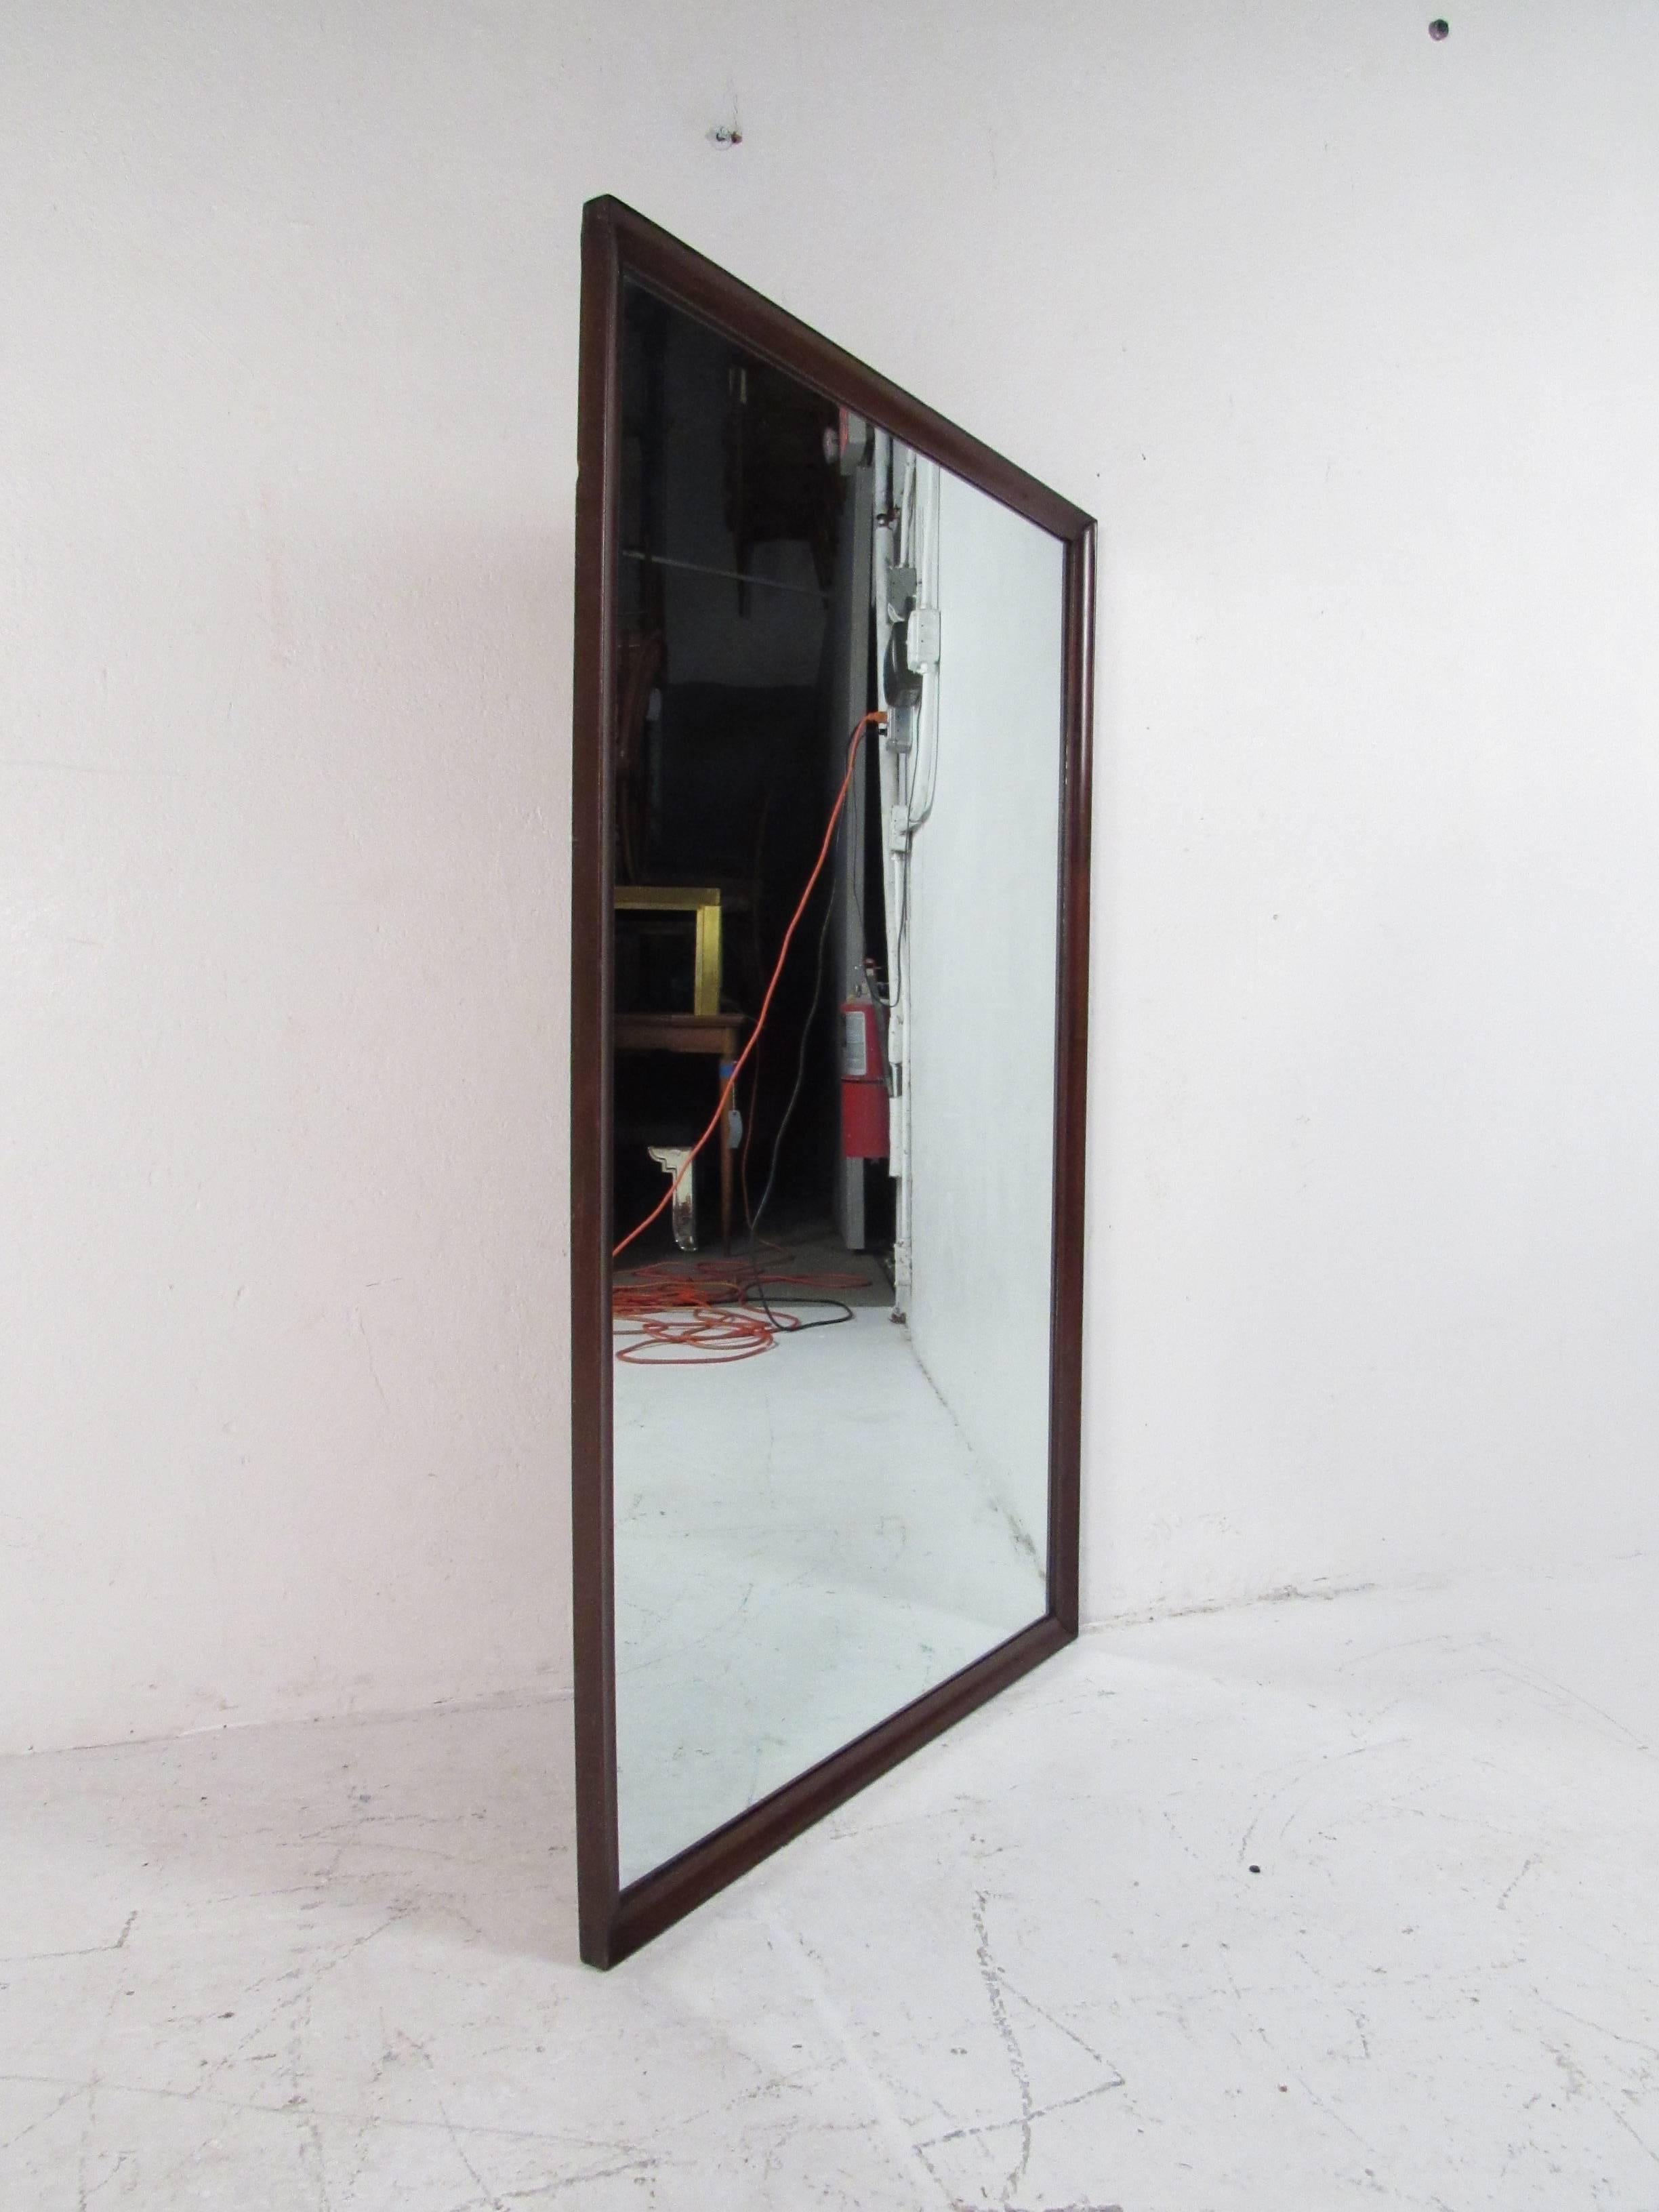 A beautiful vintage modern mirror with a dark walnut frame. Sleek design with a rectangular shape and bevelled edges. This stylish midcentury piece looks great as a wall mirror or attached to the back of a dresser. Please confirm item location (NY